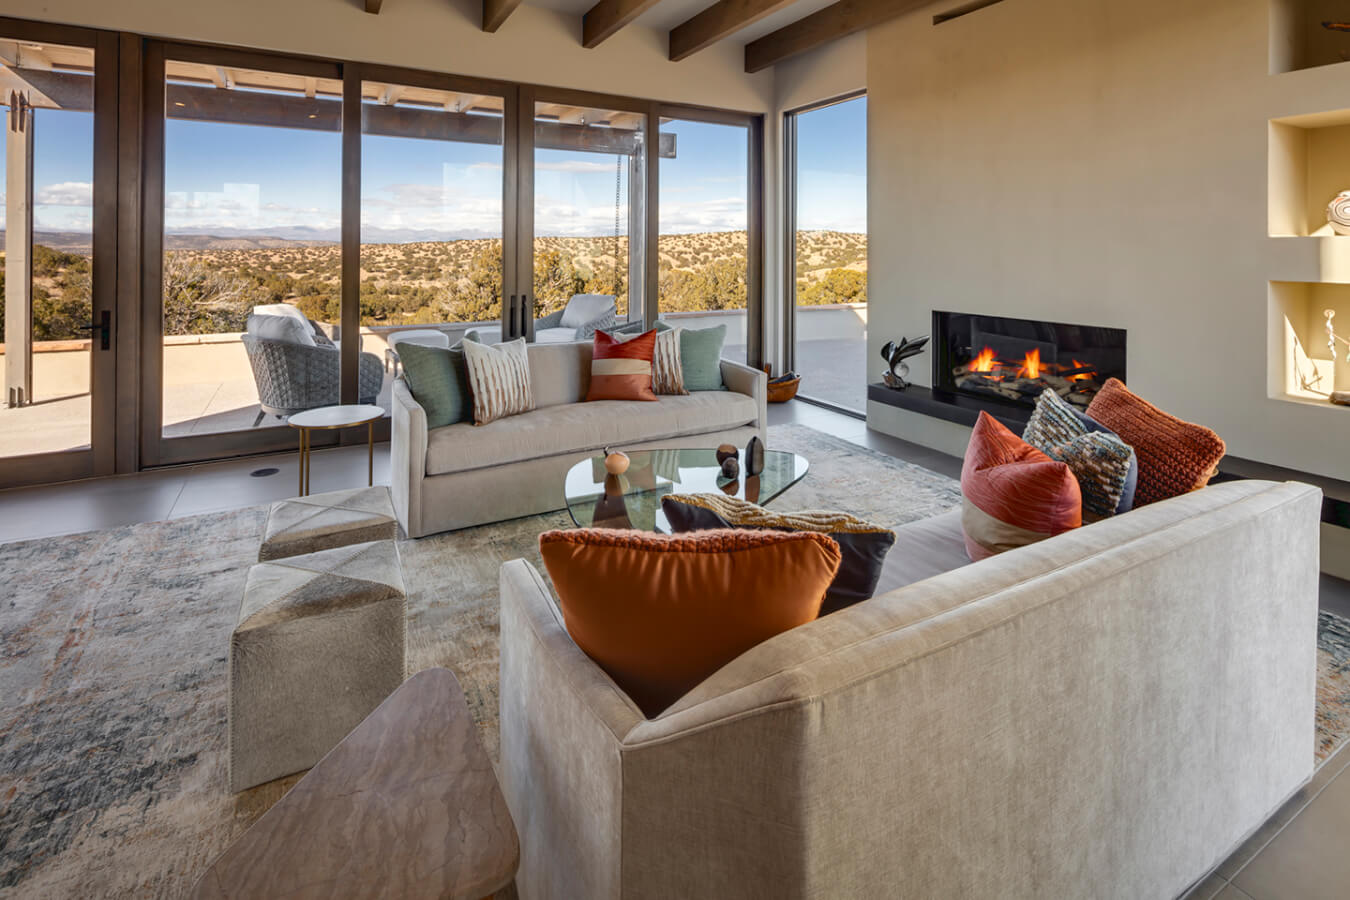 A large living room with a fireplace and a view of the mountains, designed by a Santa Fe home designer.